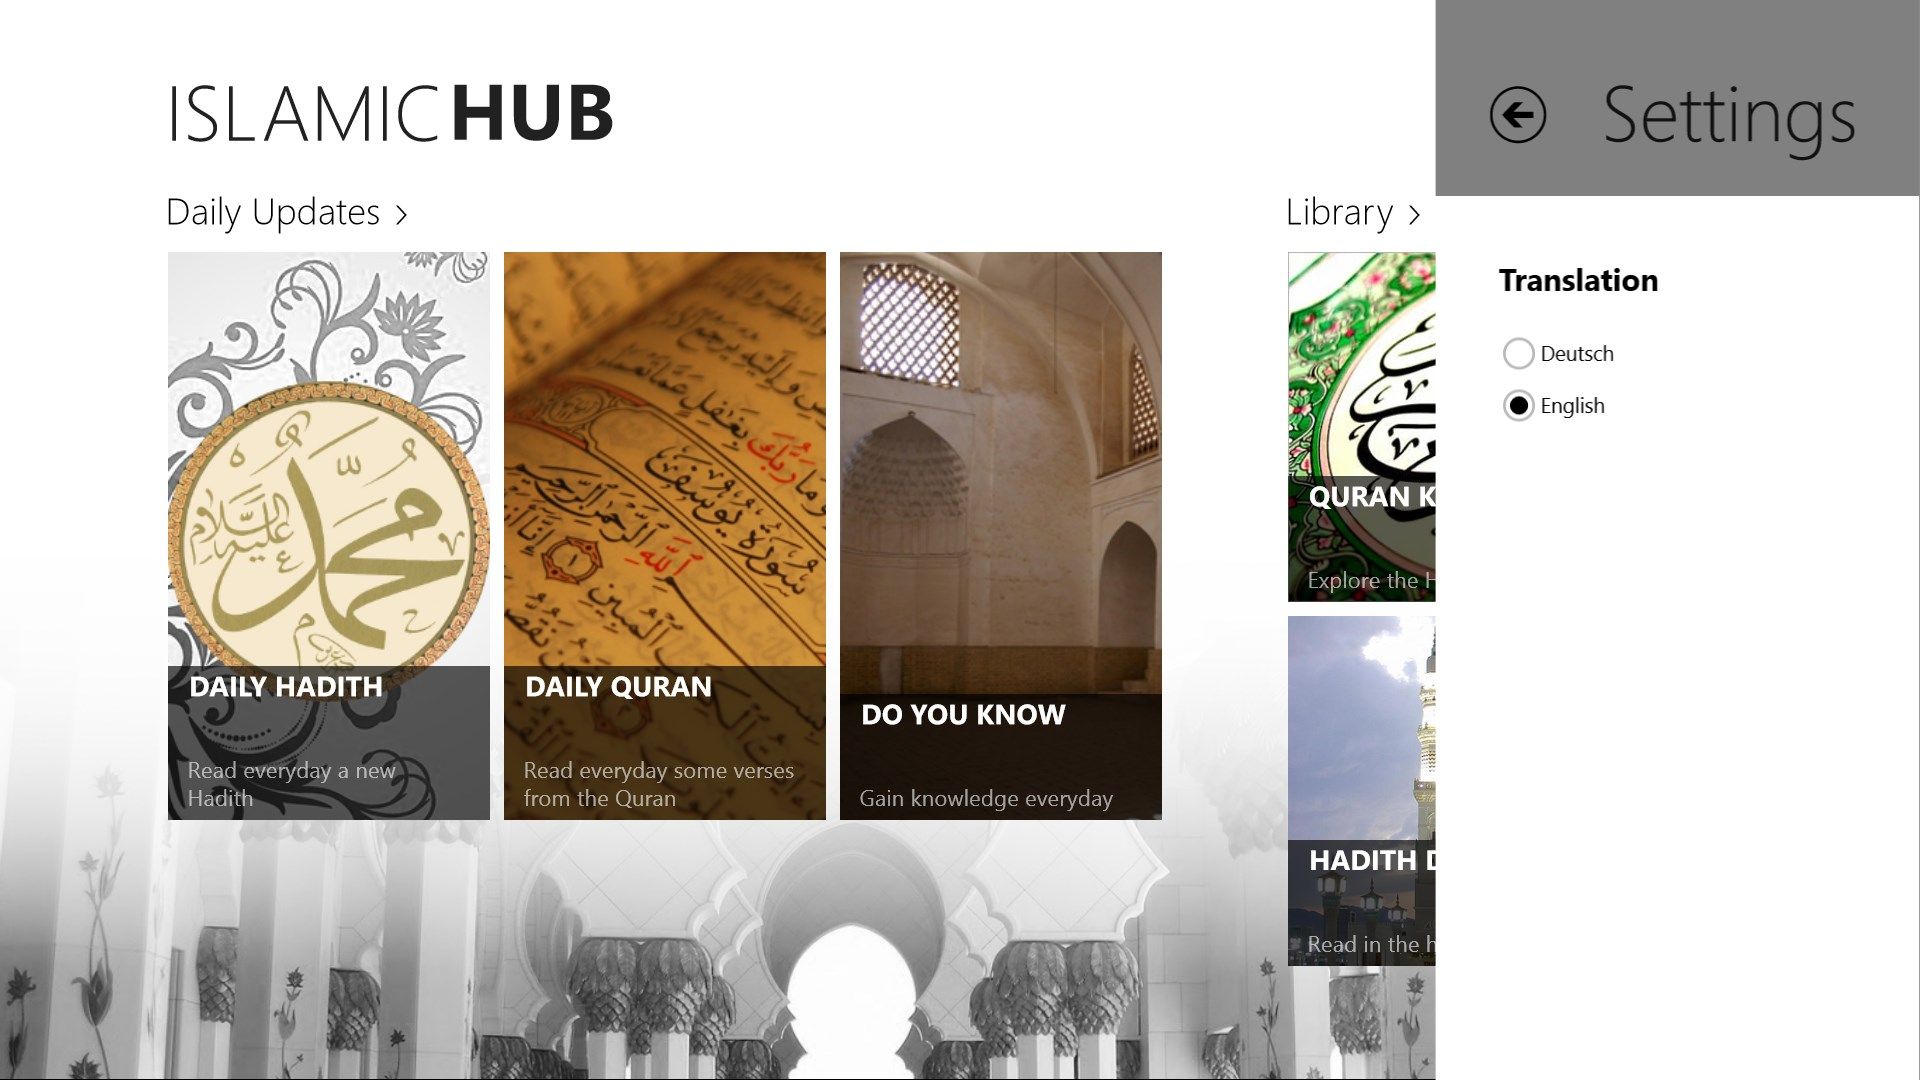 Translations of the quran and hadith